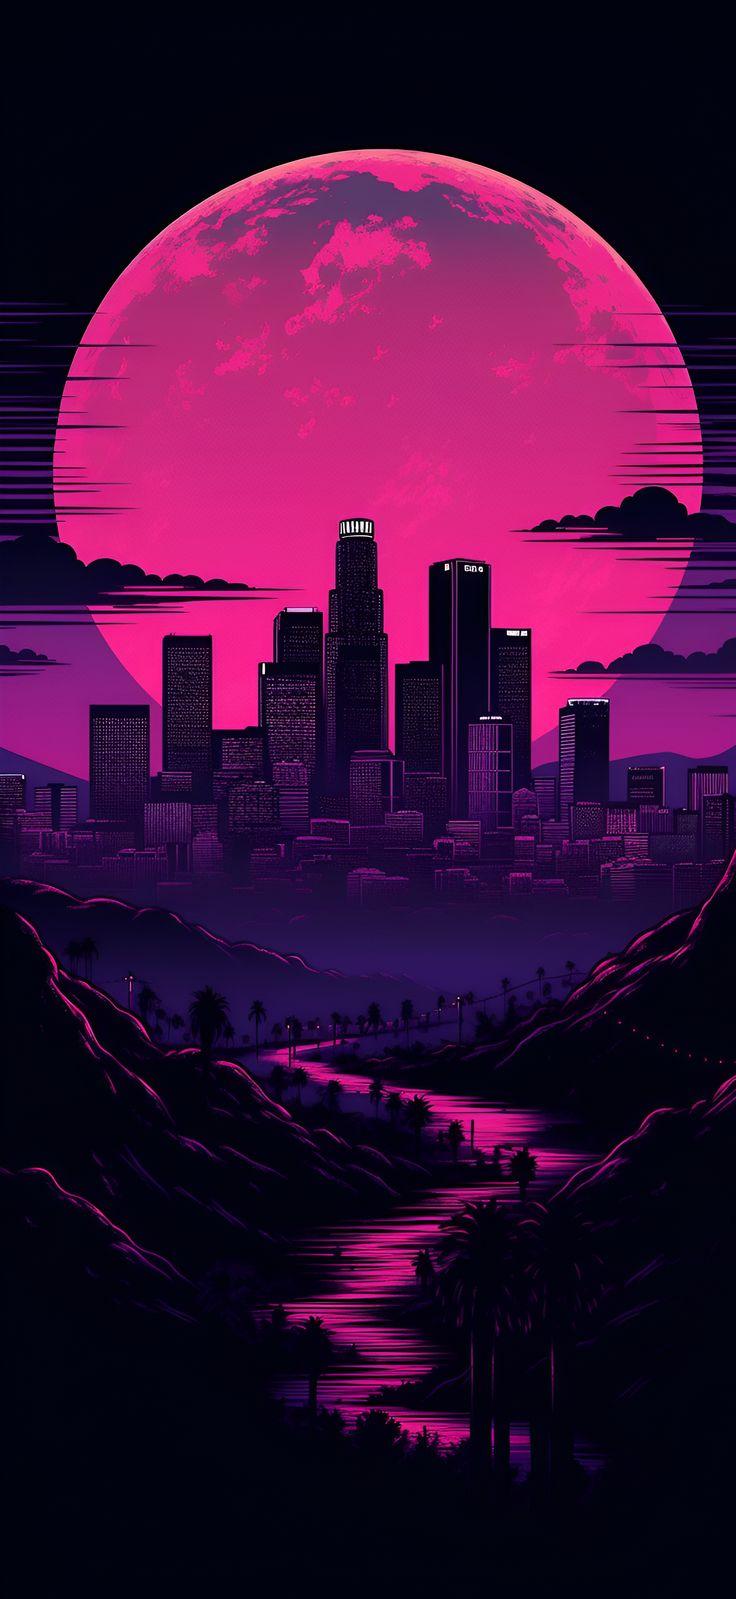 Los Angeles Skyline Neon Pink Aesthetic Wallpaper For iPhone